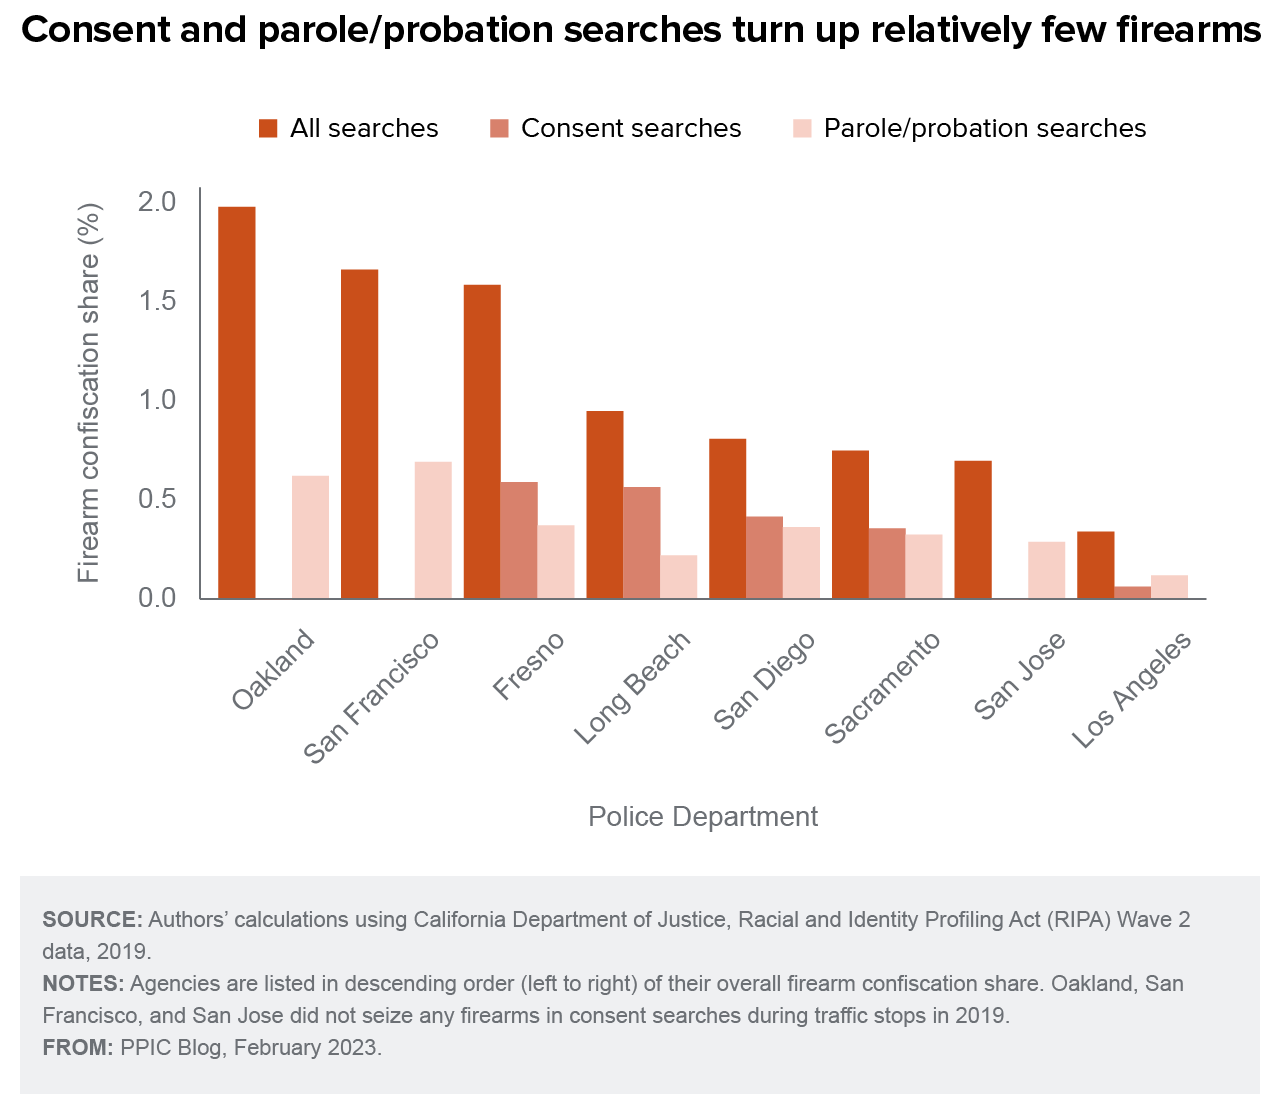 figure - Consent and parole/probation searches turn up relatively few firearms